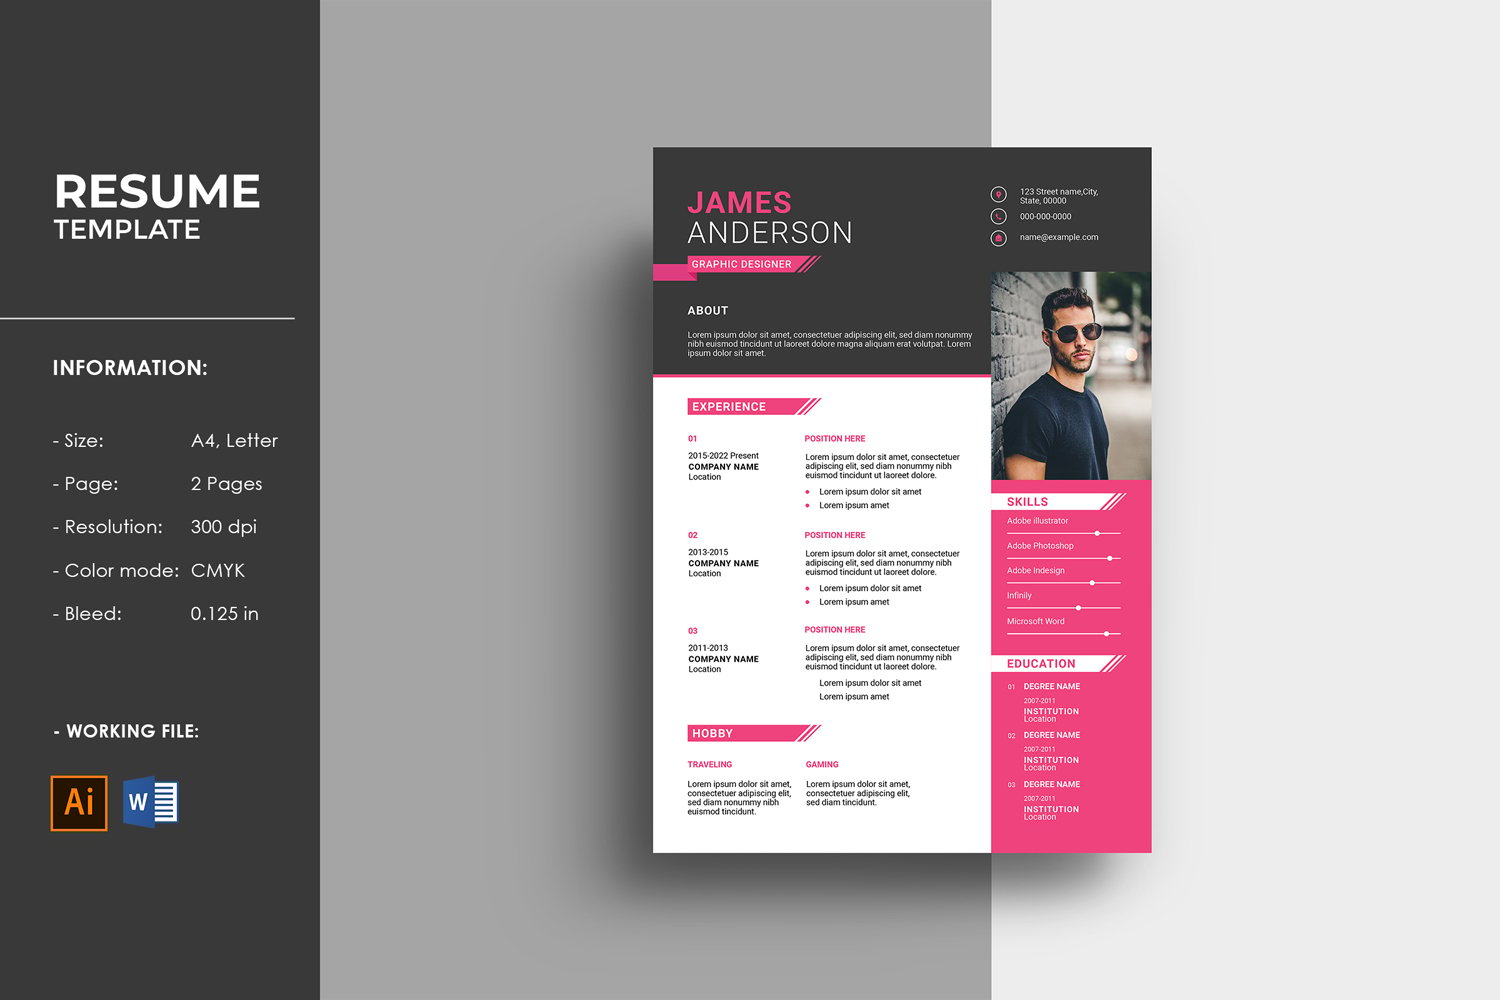 Template #330312 Resume Clean Webdesign Template - Logo template Preview